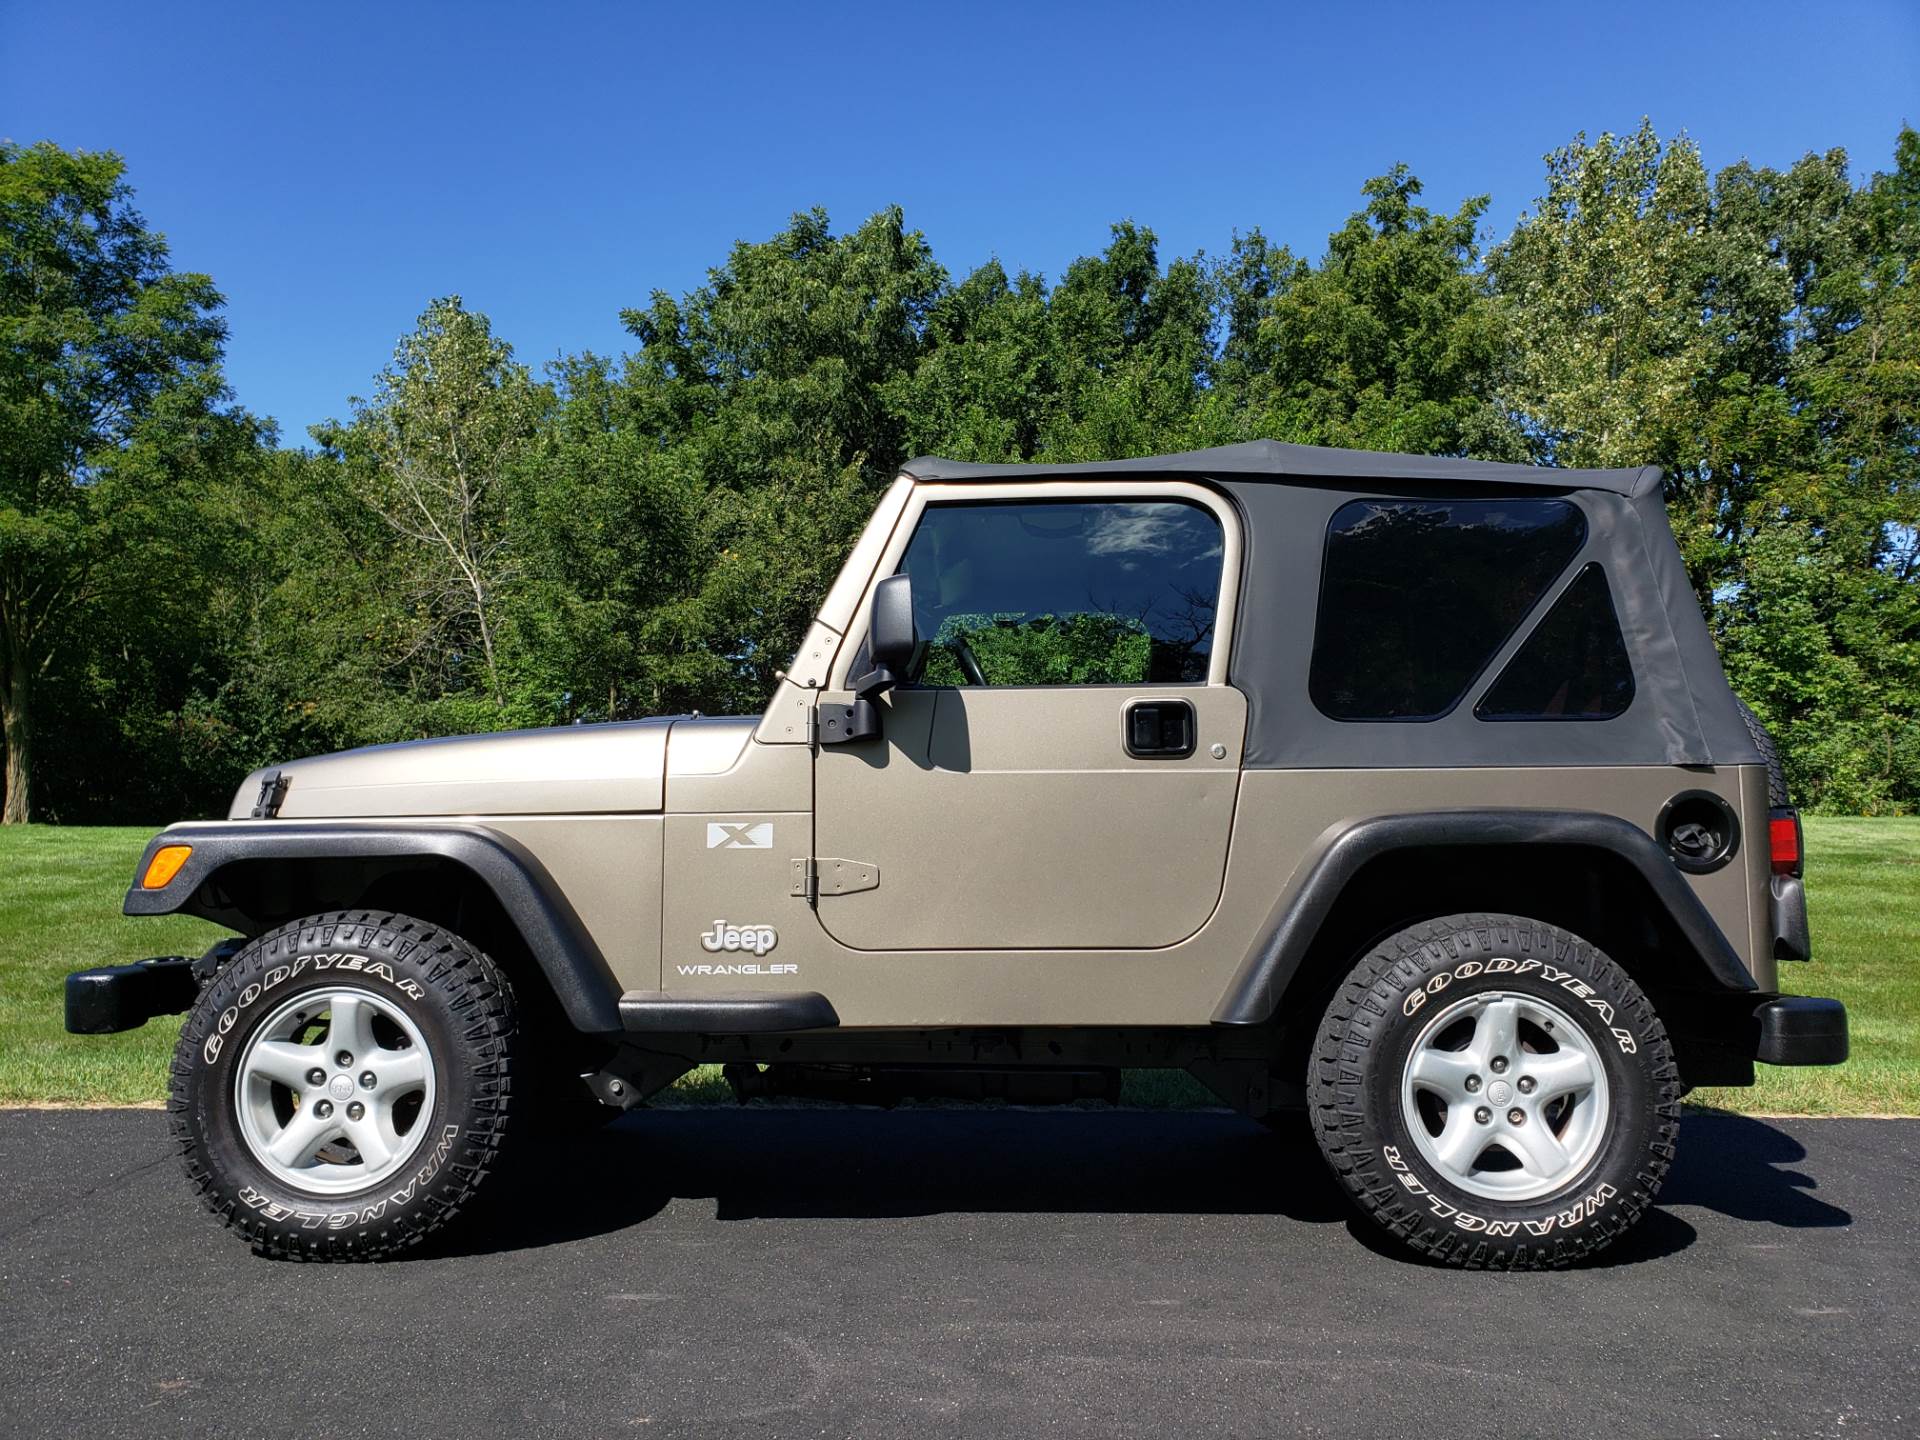 2003 Jeep Wrangler X 4WD 2dr SUV in Big Bend, Wisconsin - Photo 110